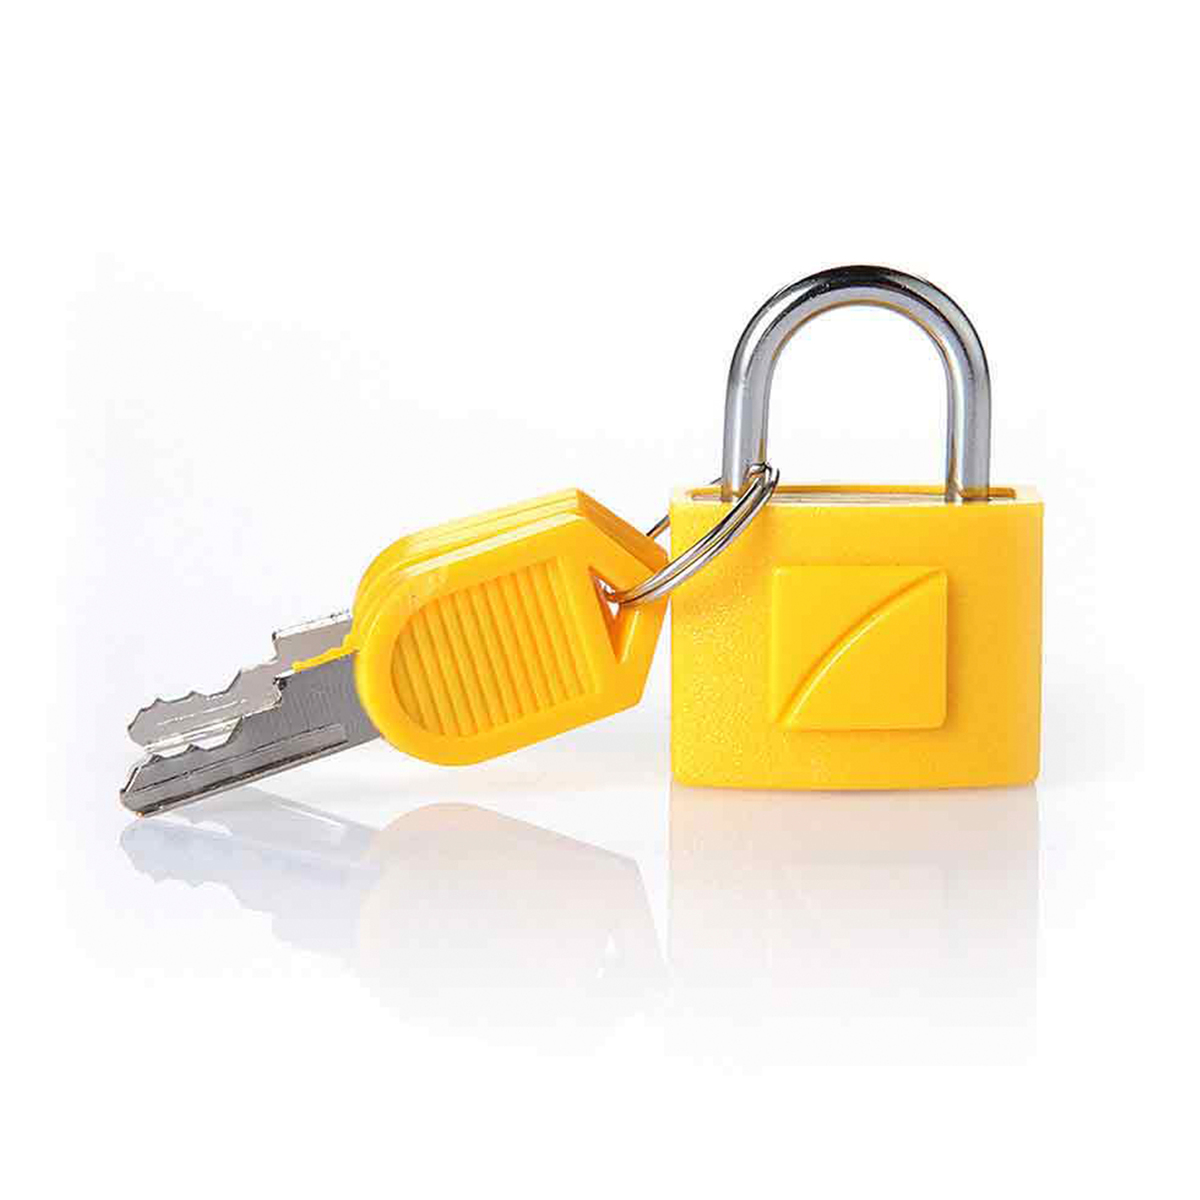 Travel Blue Suitcase Padlock Pack of 2 024 Assorted Color